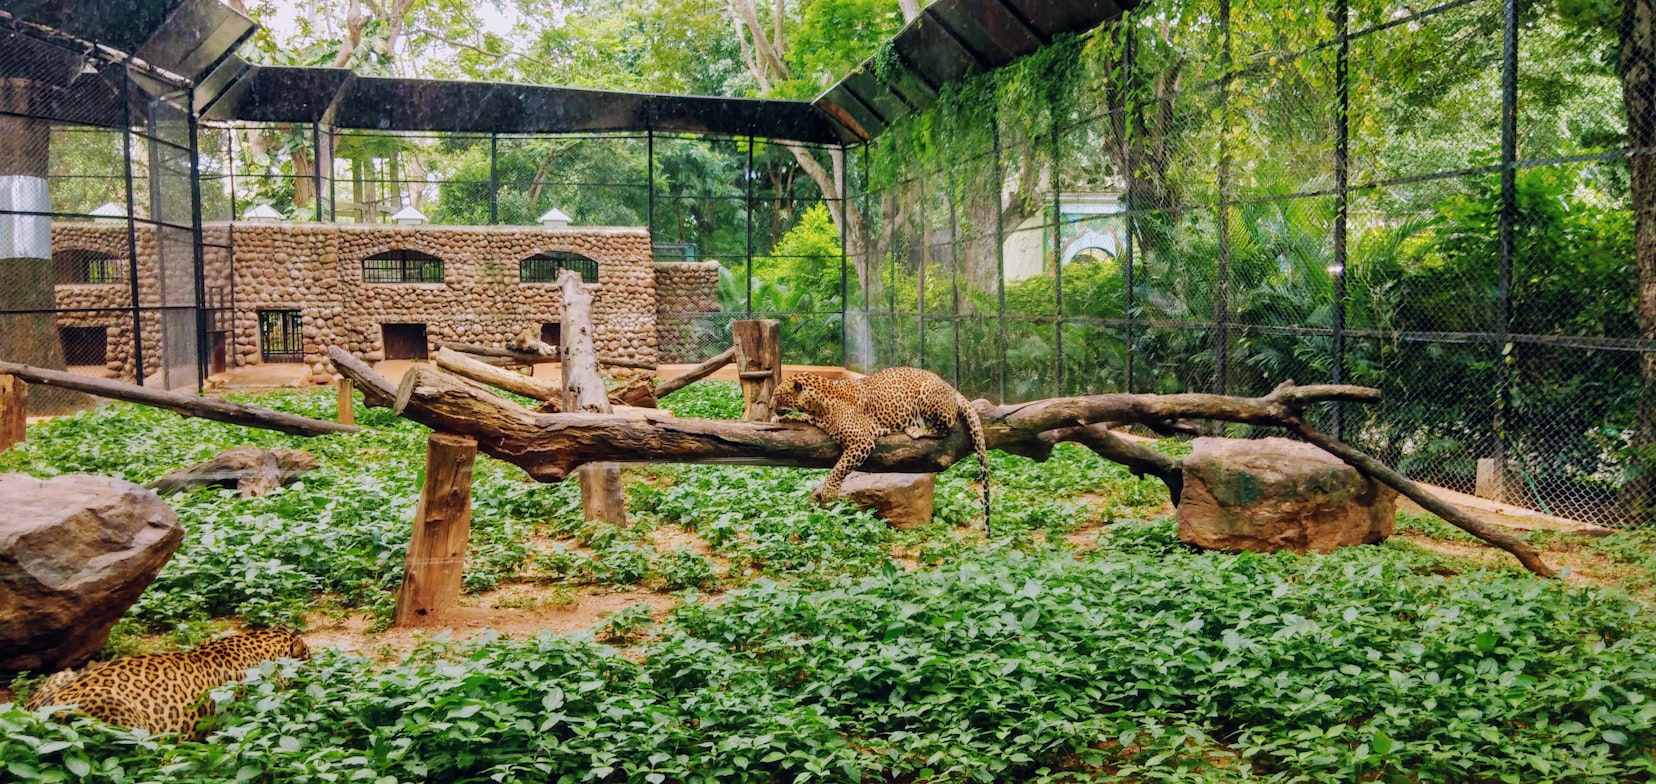 The Thrissur Zoo